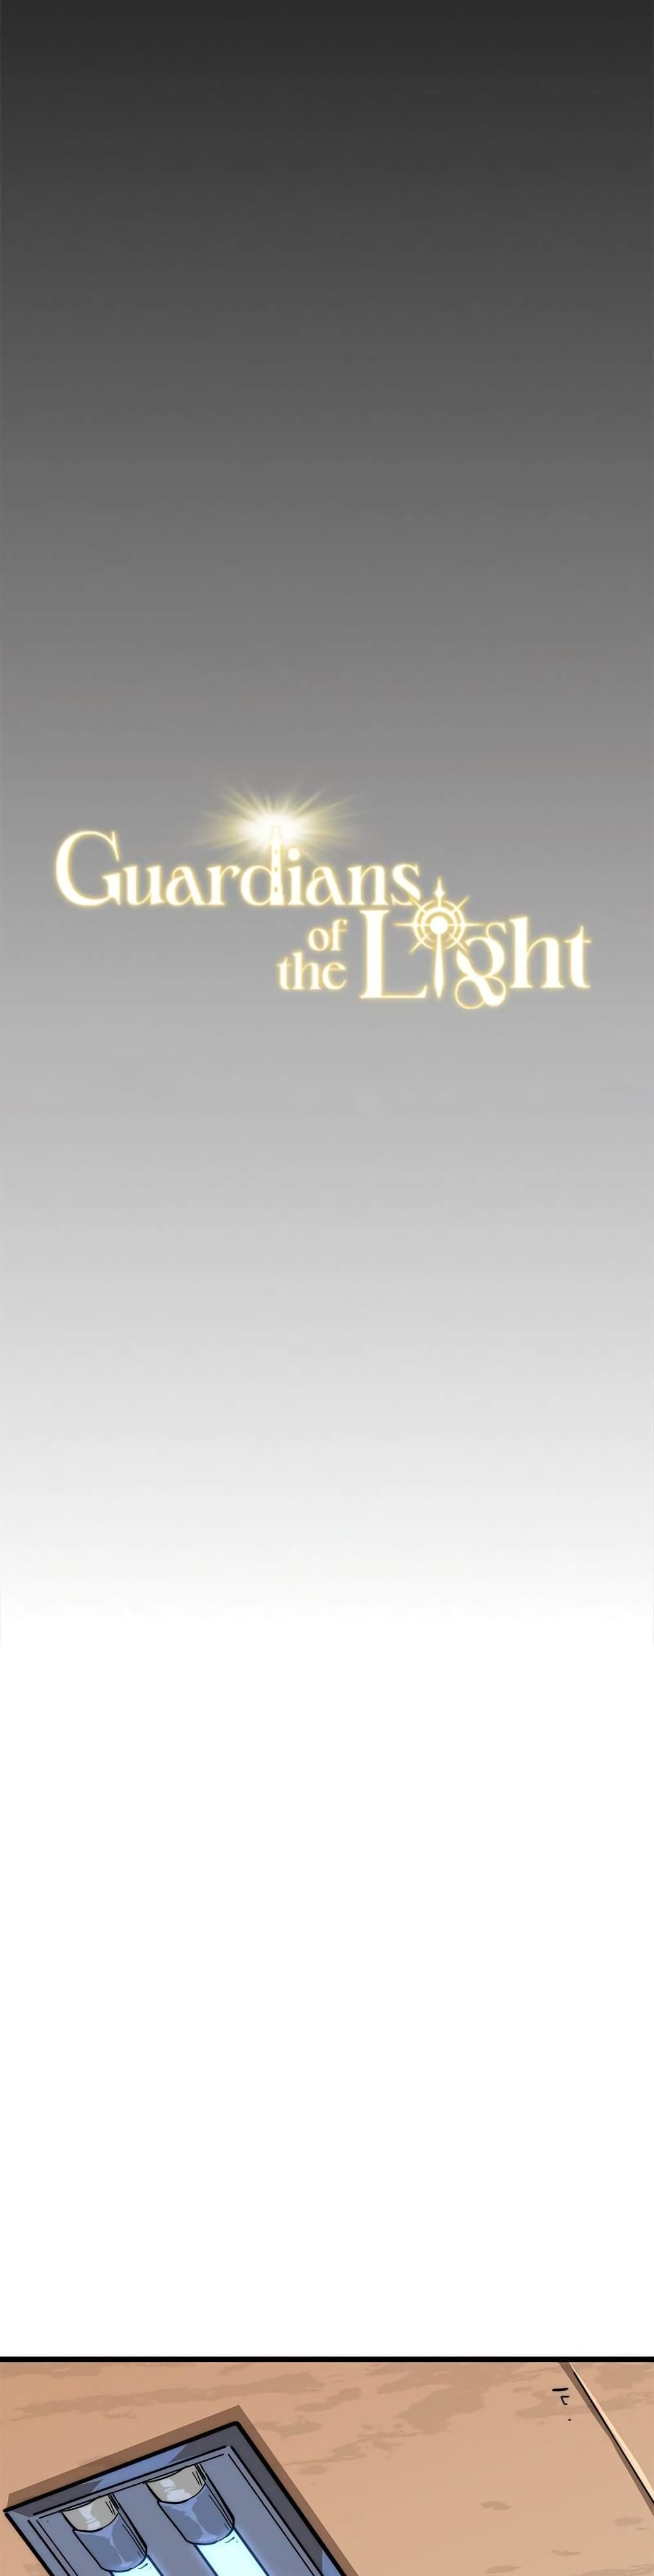 Guardians of the Light 1-1